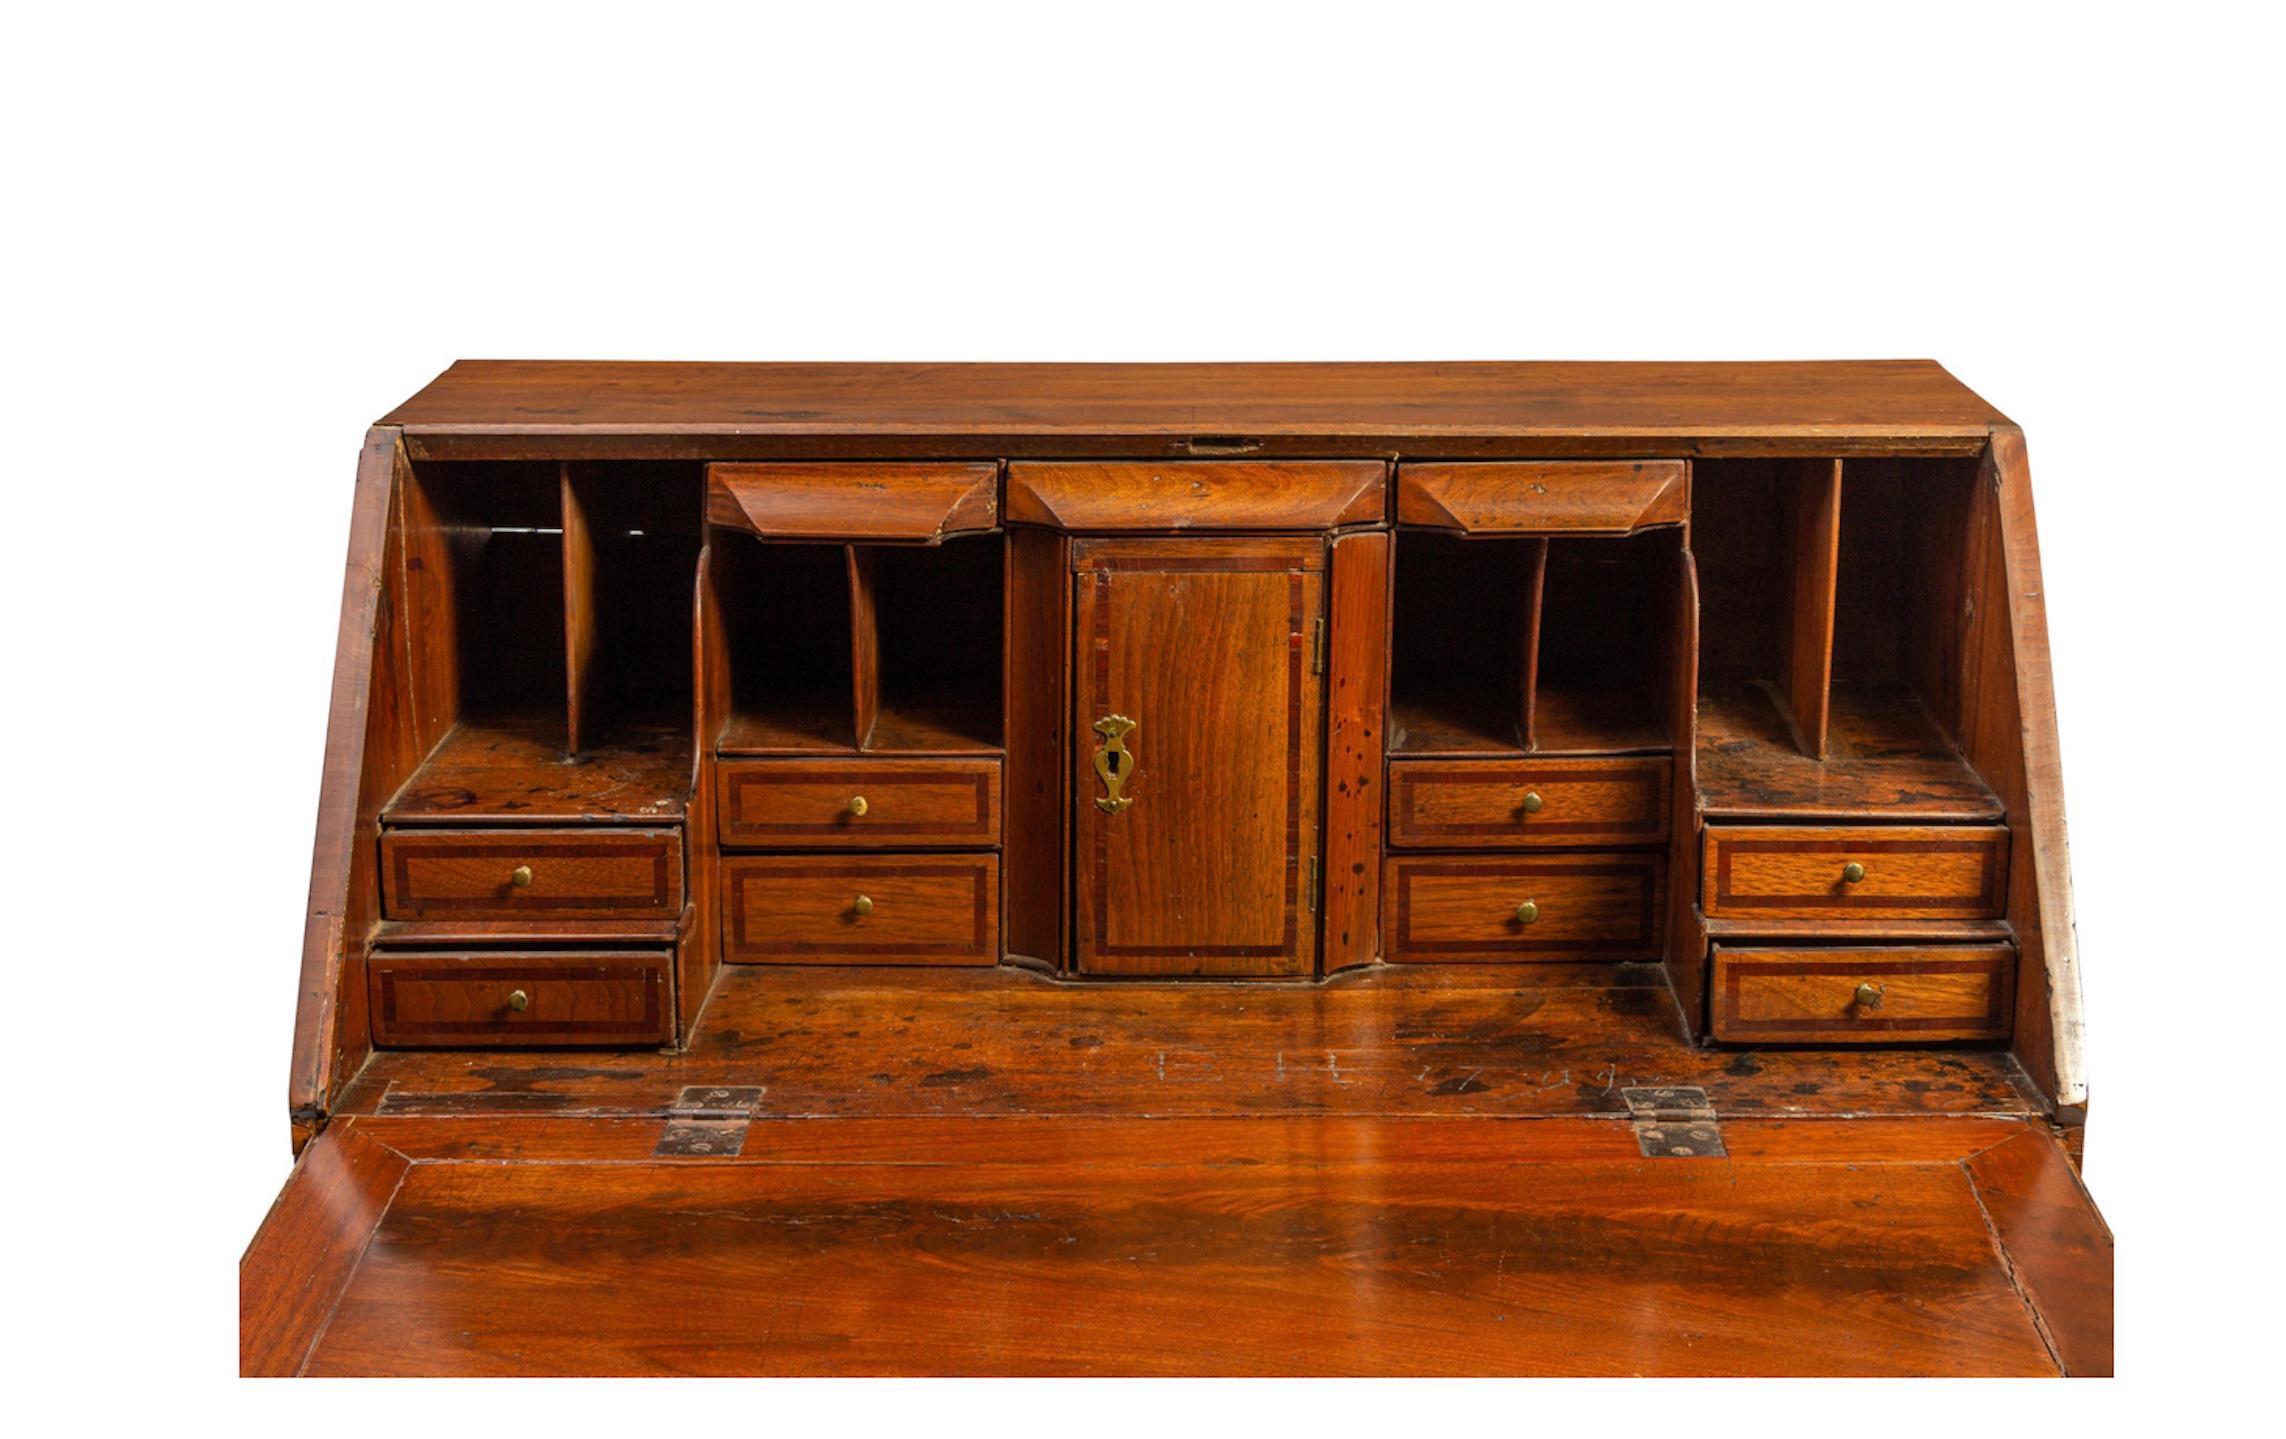 An American Slant Front Desk 19th Century Height 44 x width 37 x depth 21 inches In Good Condition For Sale In Buchanan, MI